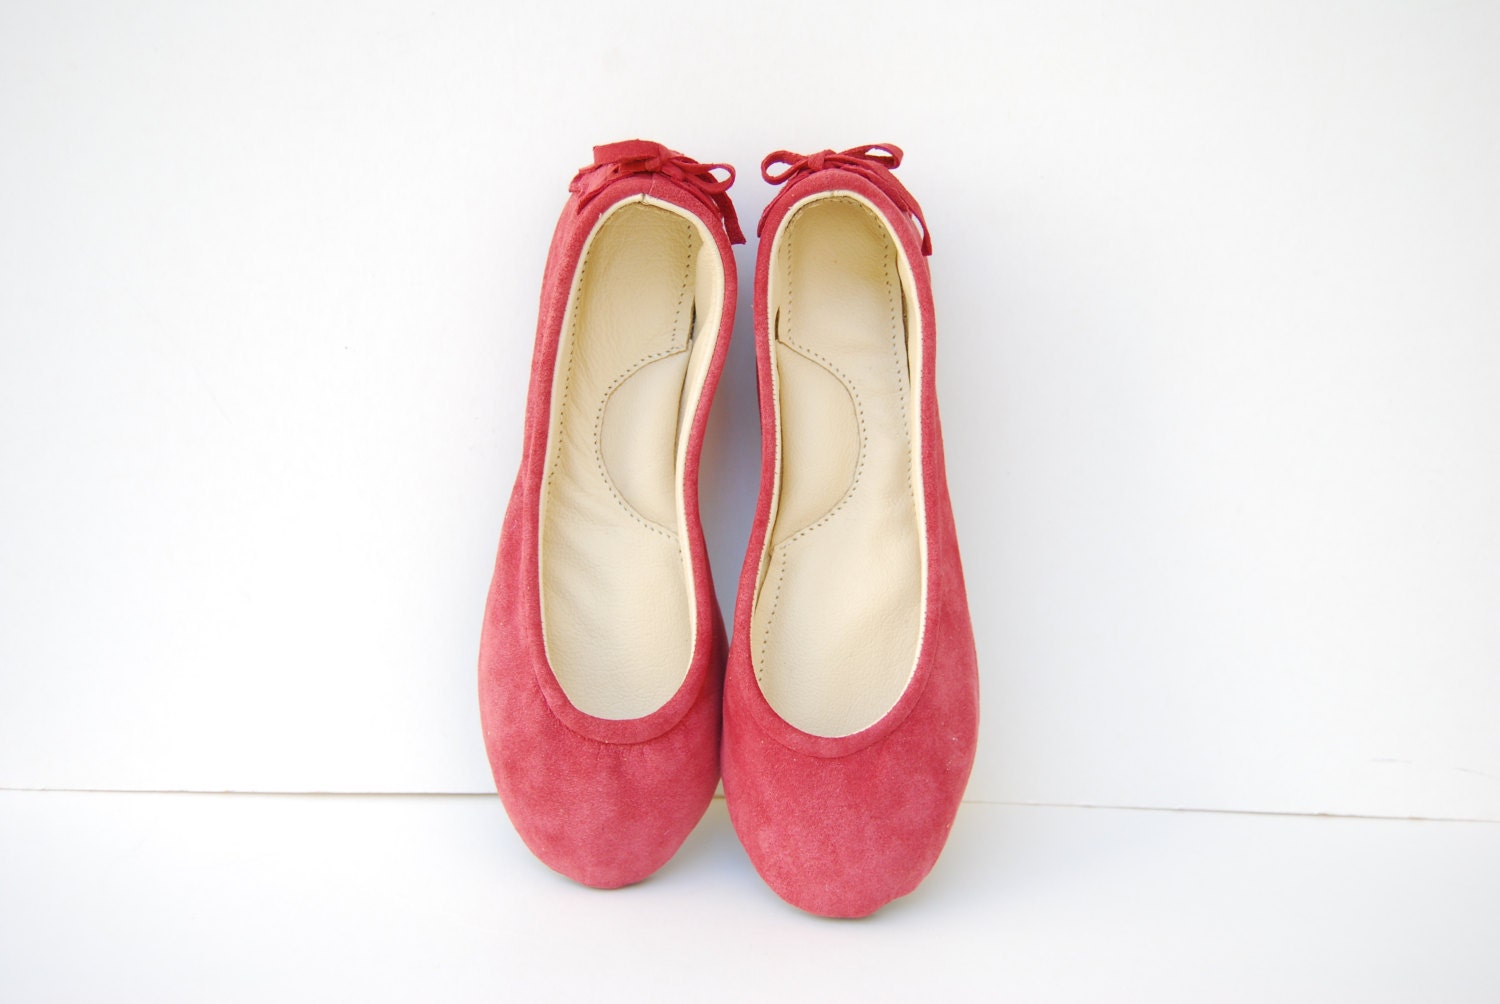 Rose pink suede leather ballet flats custom made